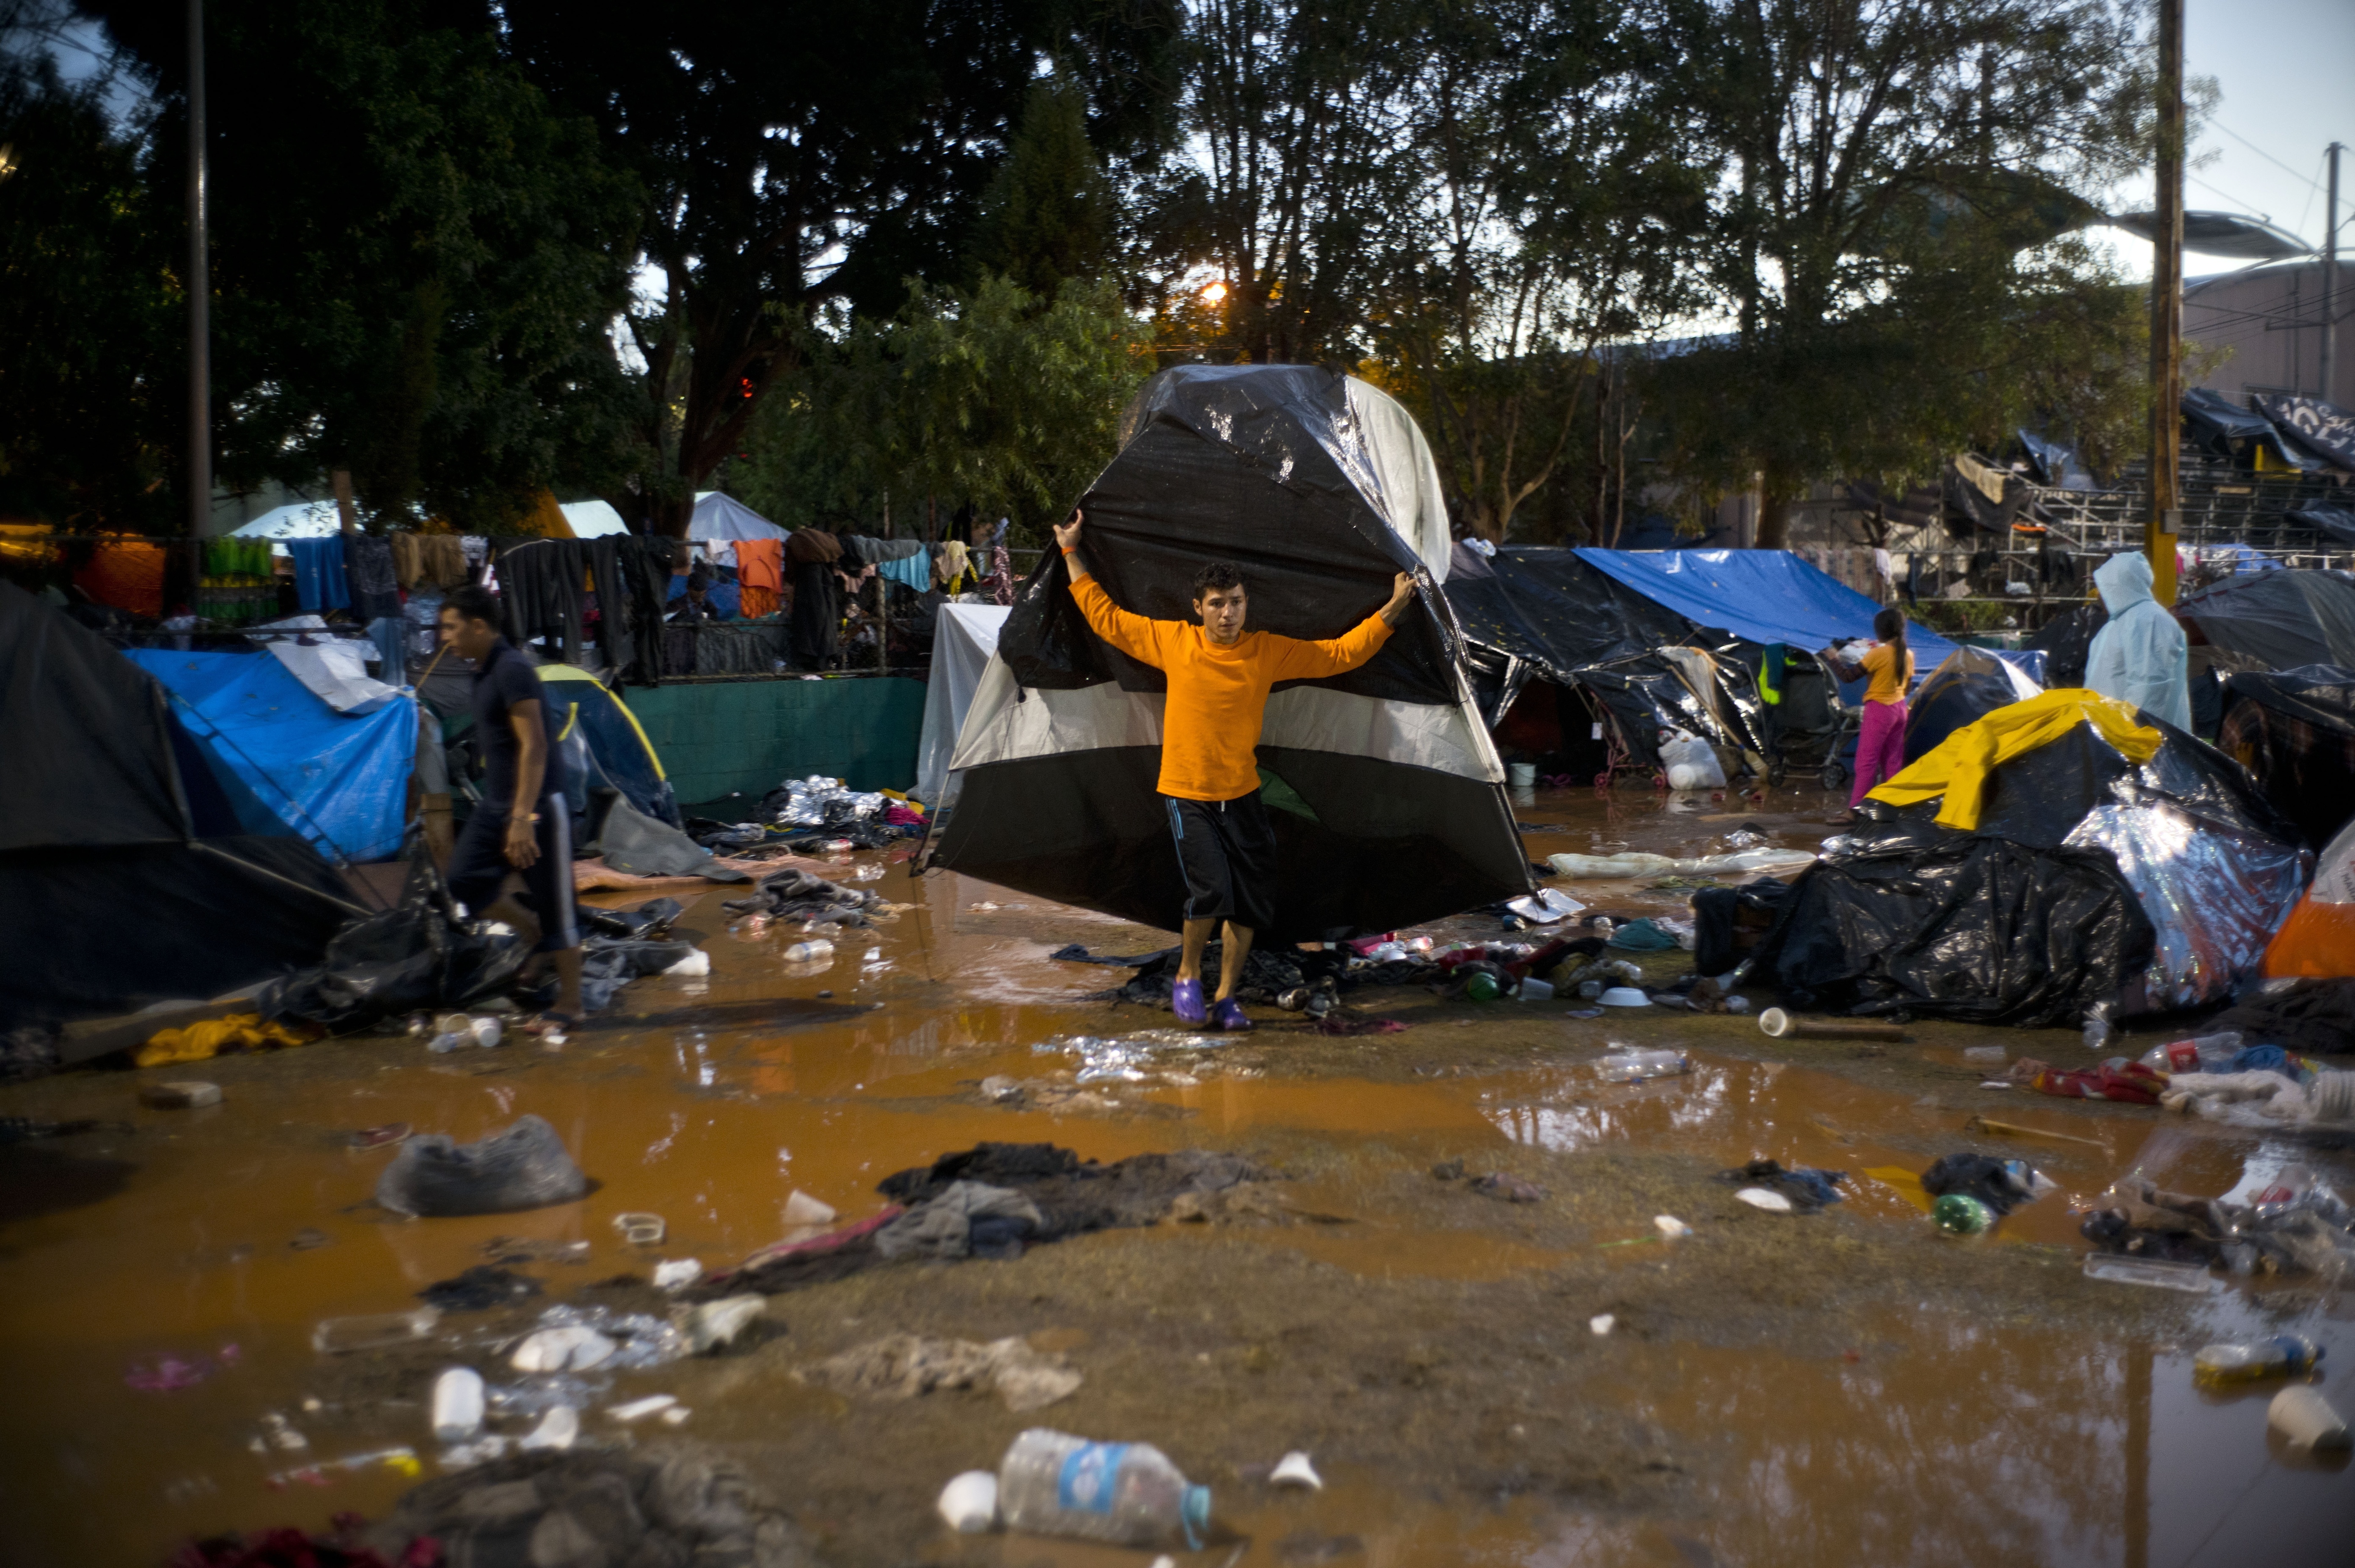 A migrant moves his tent in the rain before he was being transferred by bus to another shelter in better conditions than the flooded sports complex where thousands of Central Americans were living, in Tijuana, Mexico, following heavy rains, on Thursday, Nov. 29, 2018. Aid workers and humanitarian organizations expressed concerns Thursday about the unsanitary conditions at the sports complex in Tijuana where more than 6,000 Central American migrants are packed into a space adequate for half that many people and where lice infestations and respiratory infections are rampant. (AP Photo/Ramon Espinosa)